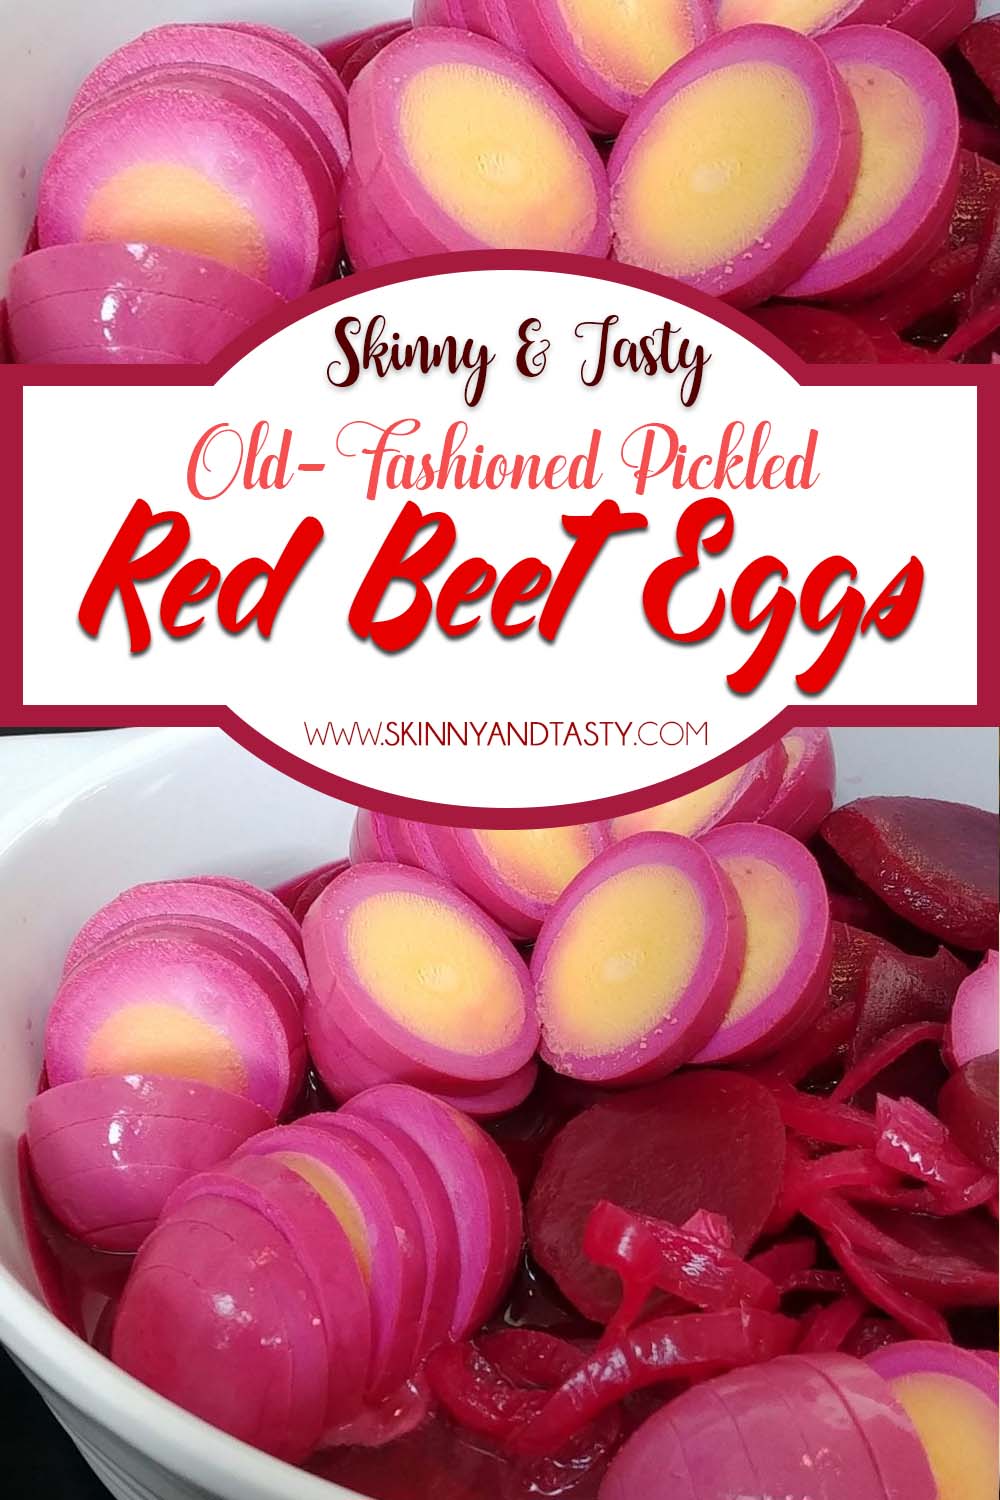 Old-Fashioned Pickled Red Beet Eggs